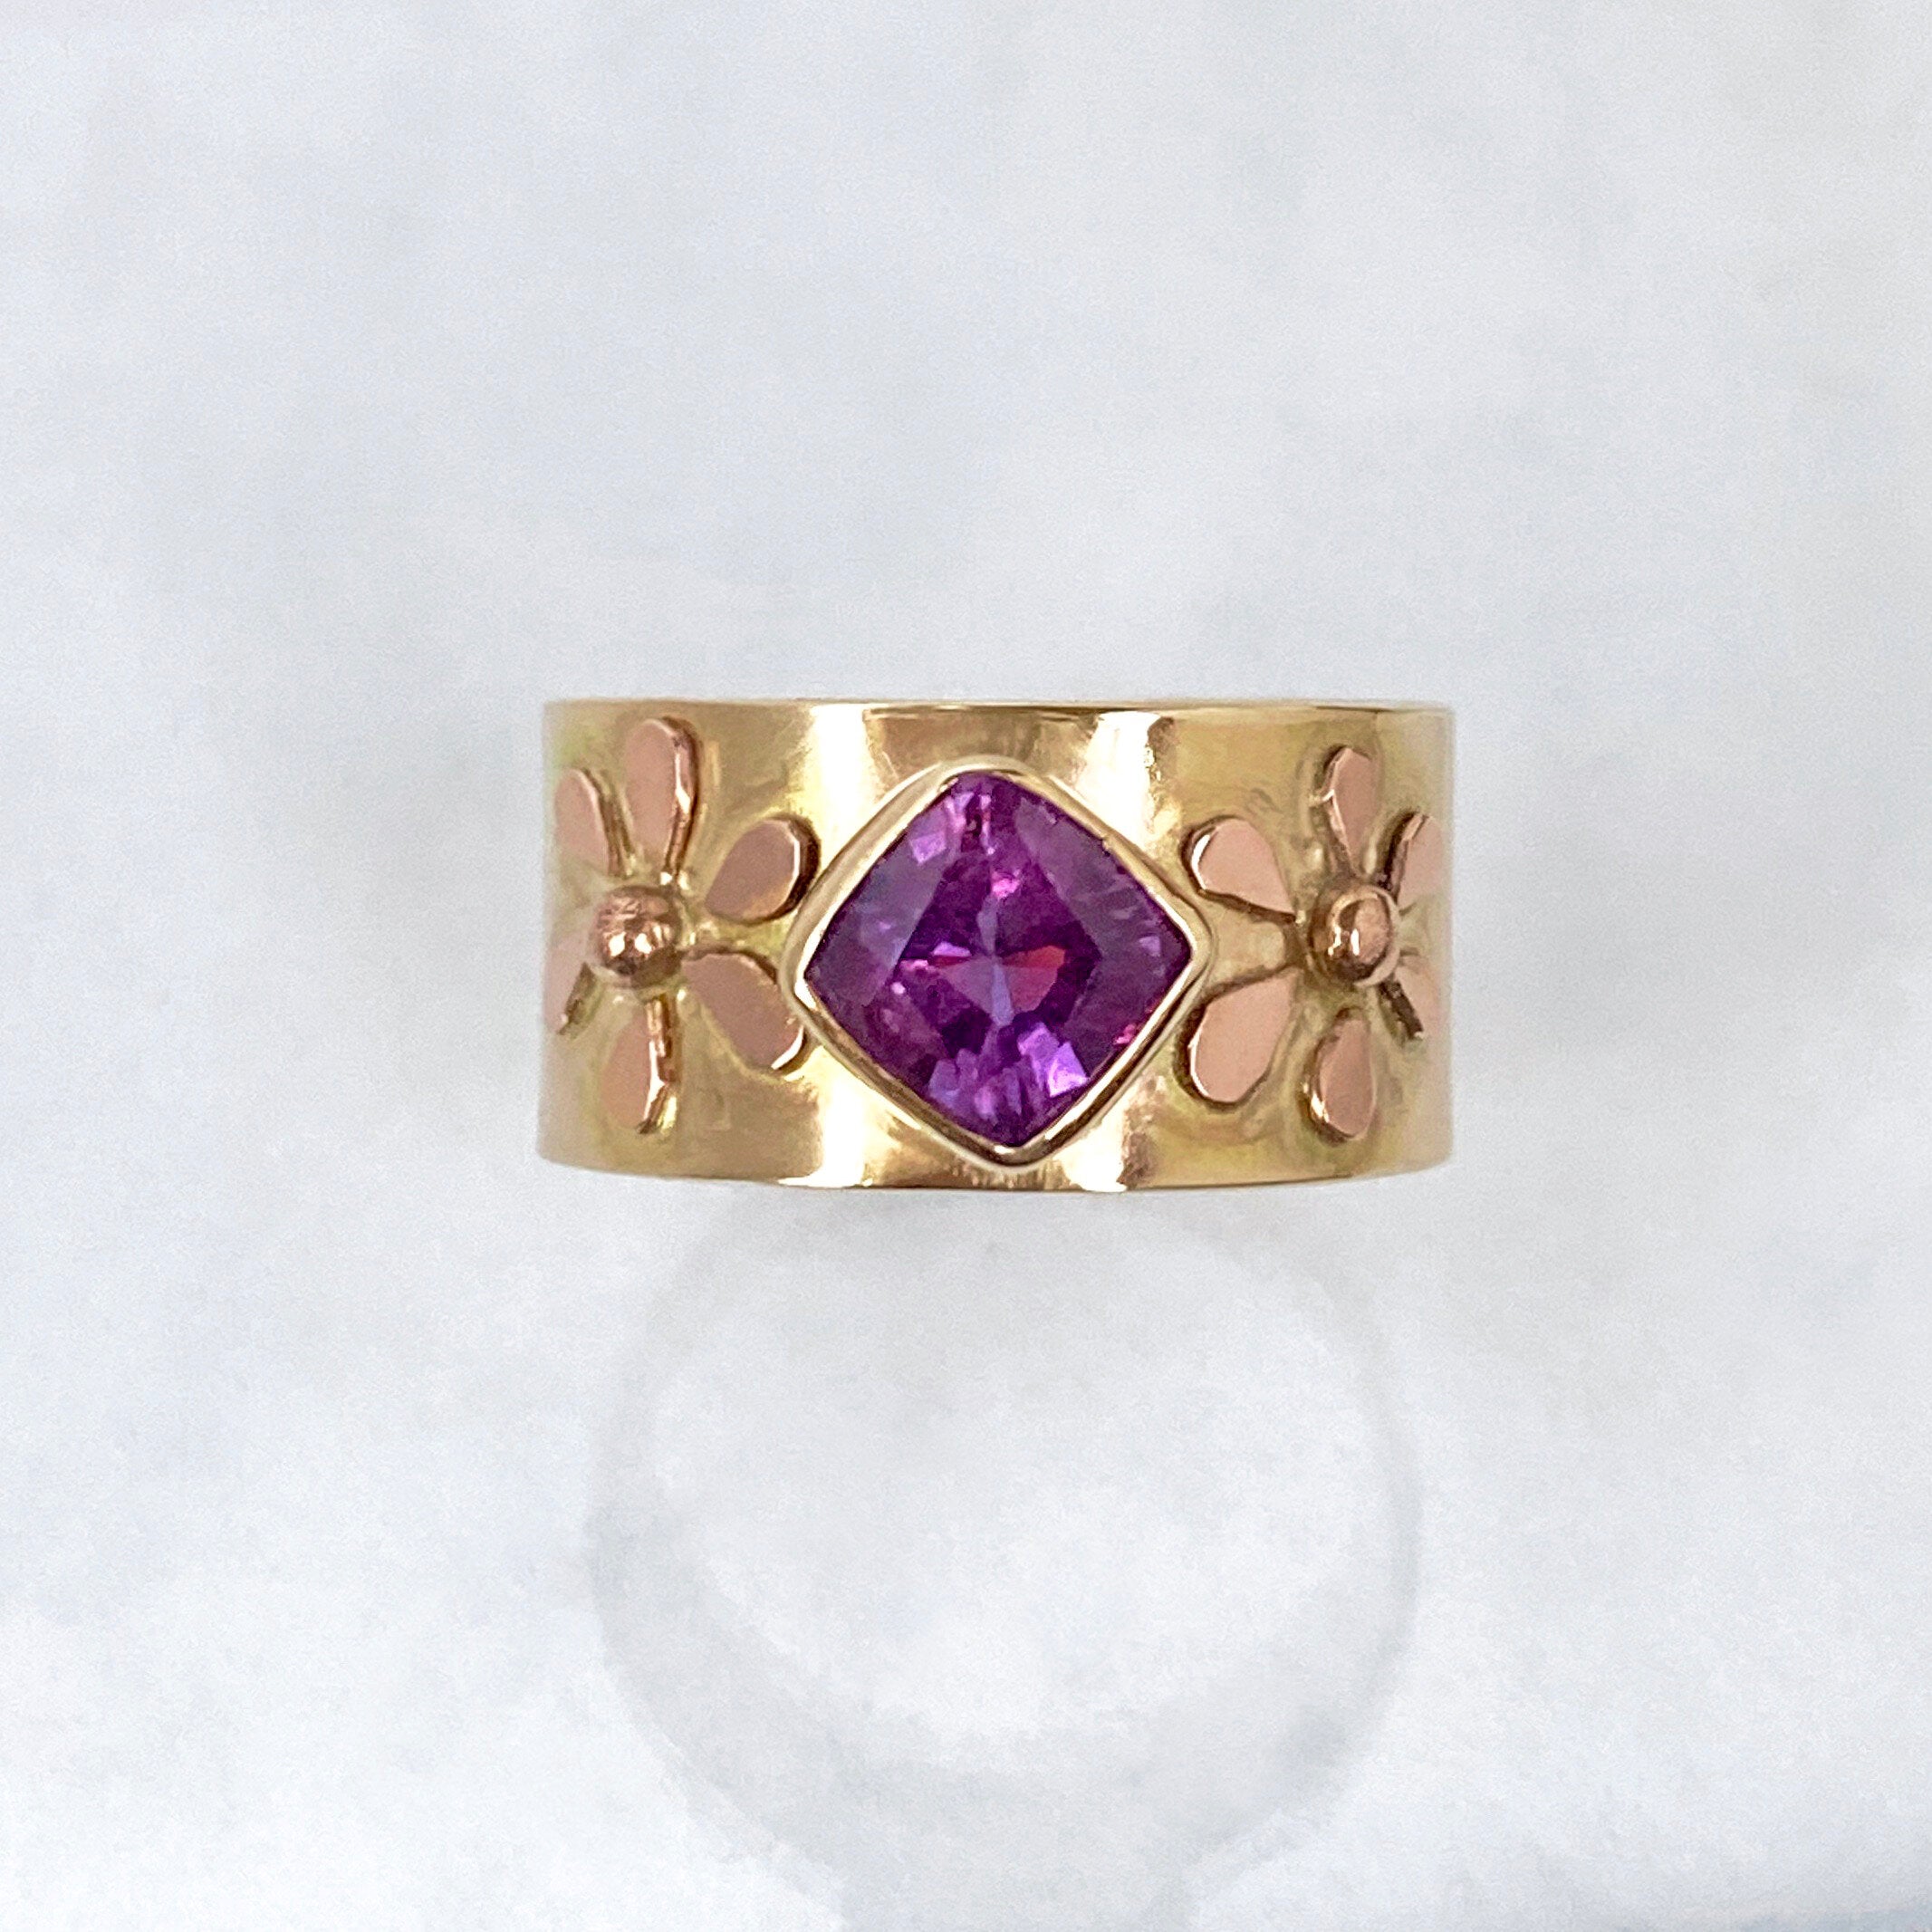 14K Sapphire Ring, Purple Sapphire Wide Flower Ring, One of a Kind